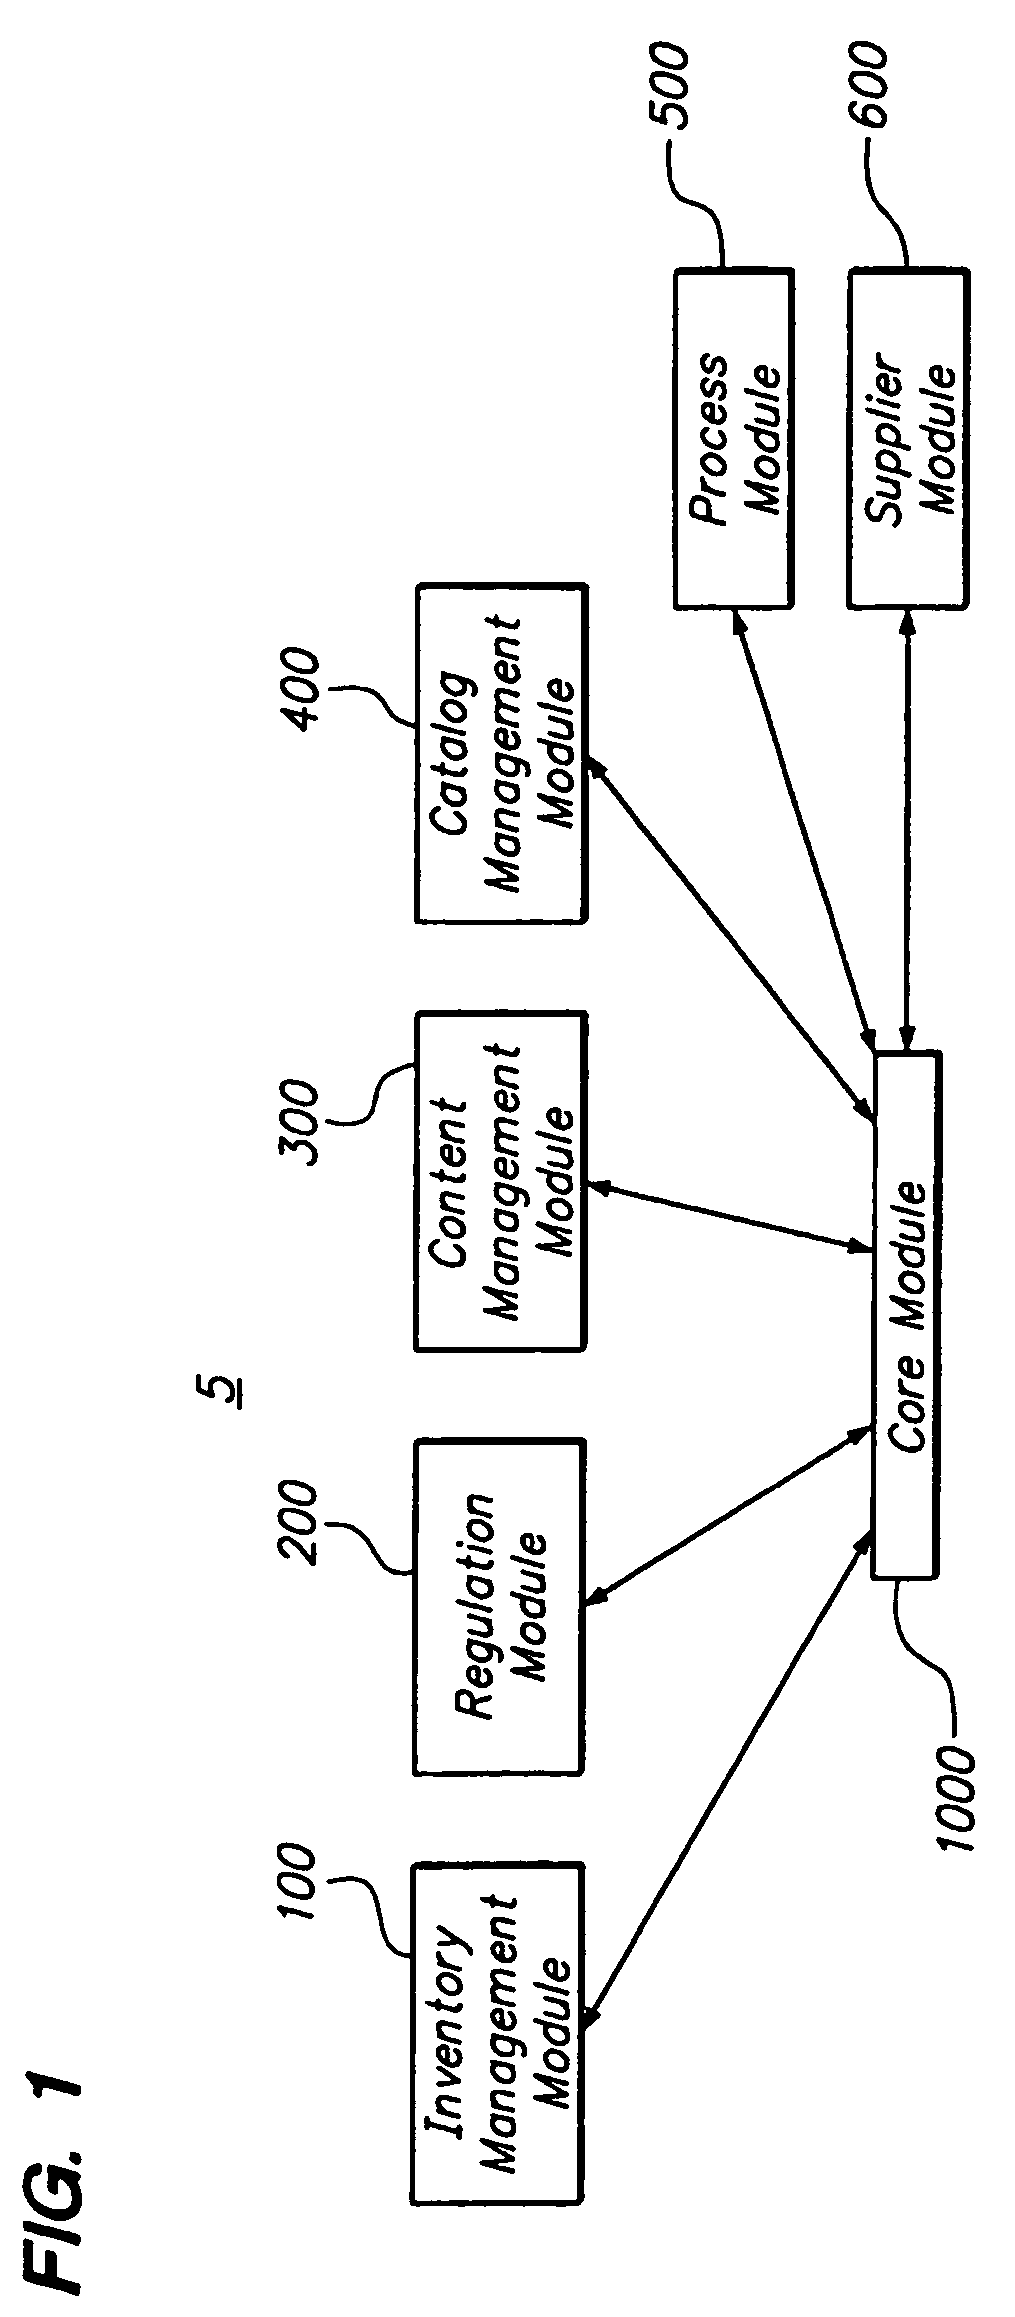 Systems and methods for managing the development and manufacturing of a drug